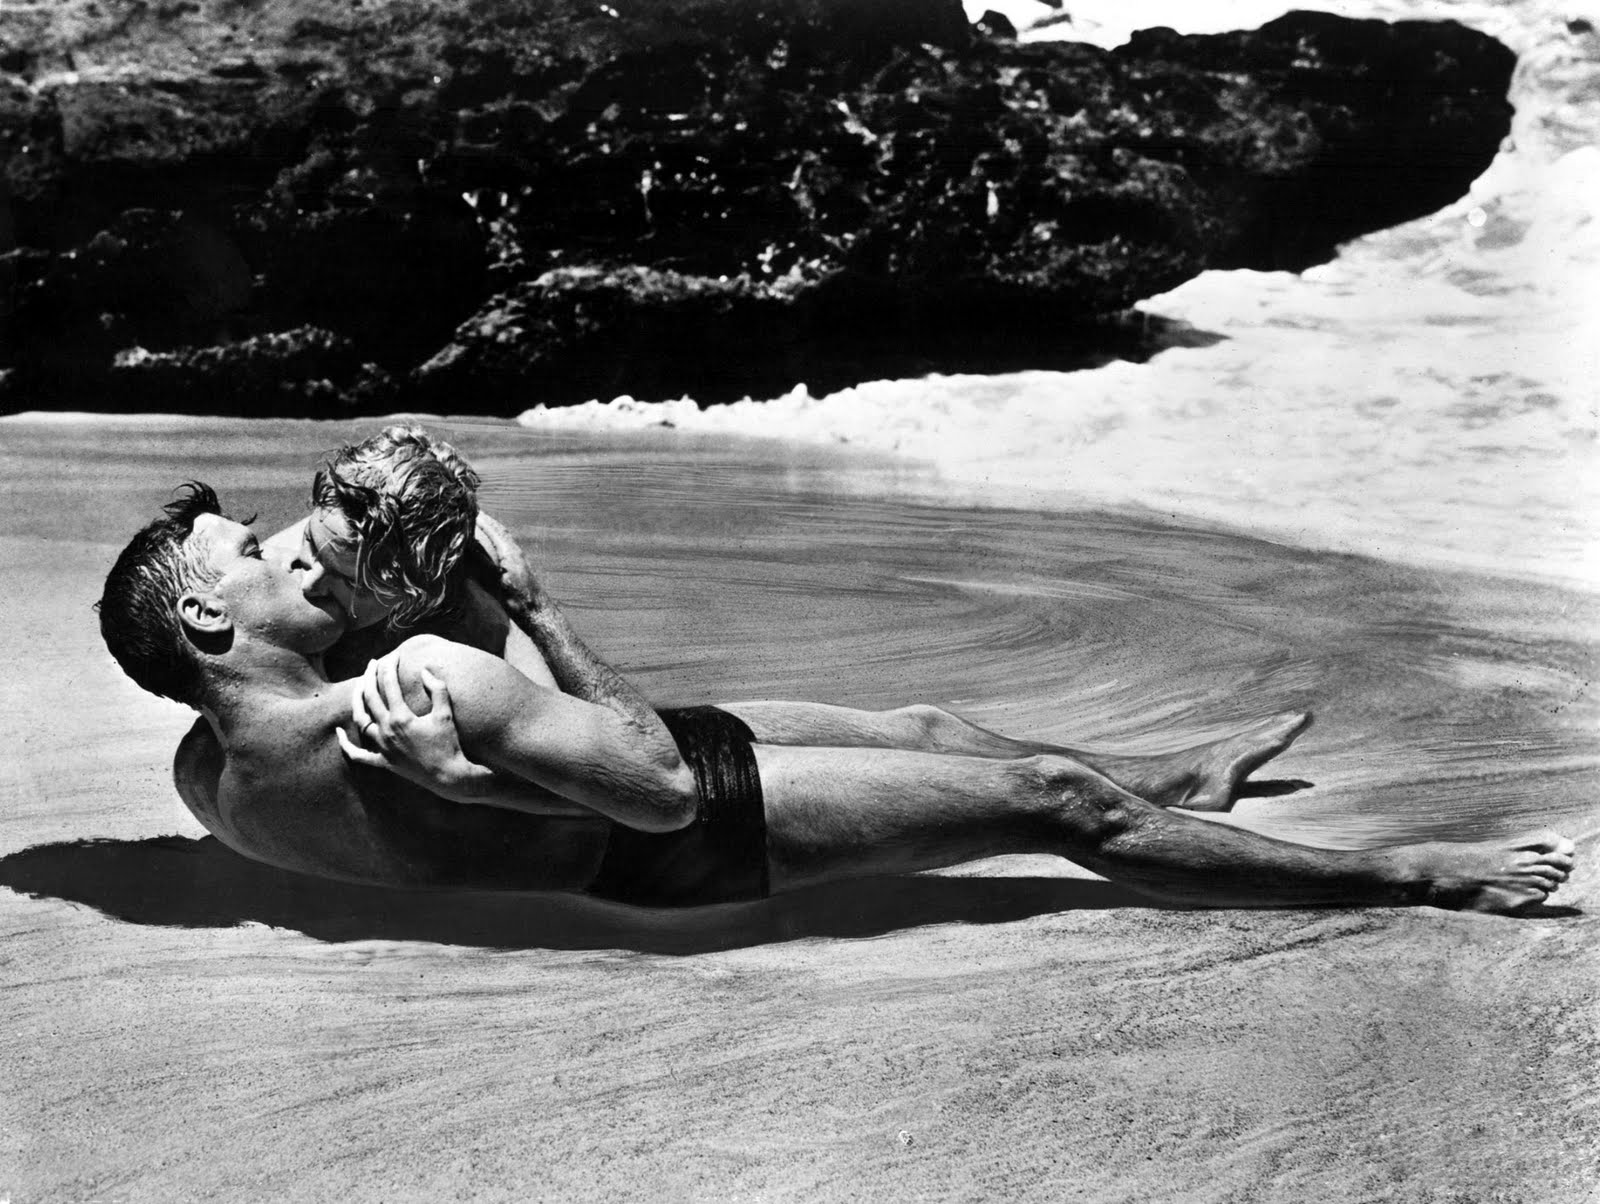 From Here To Eternity with Burt Lancaster and Deborah Kerr